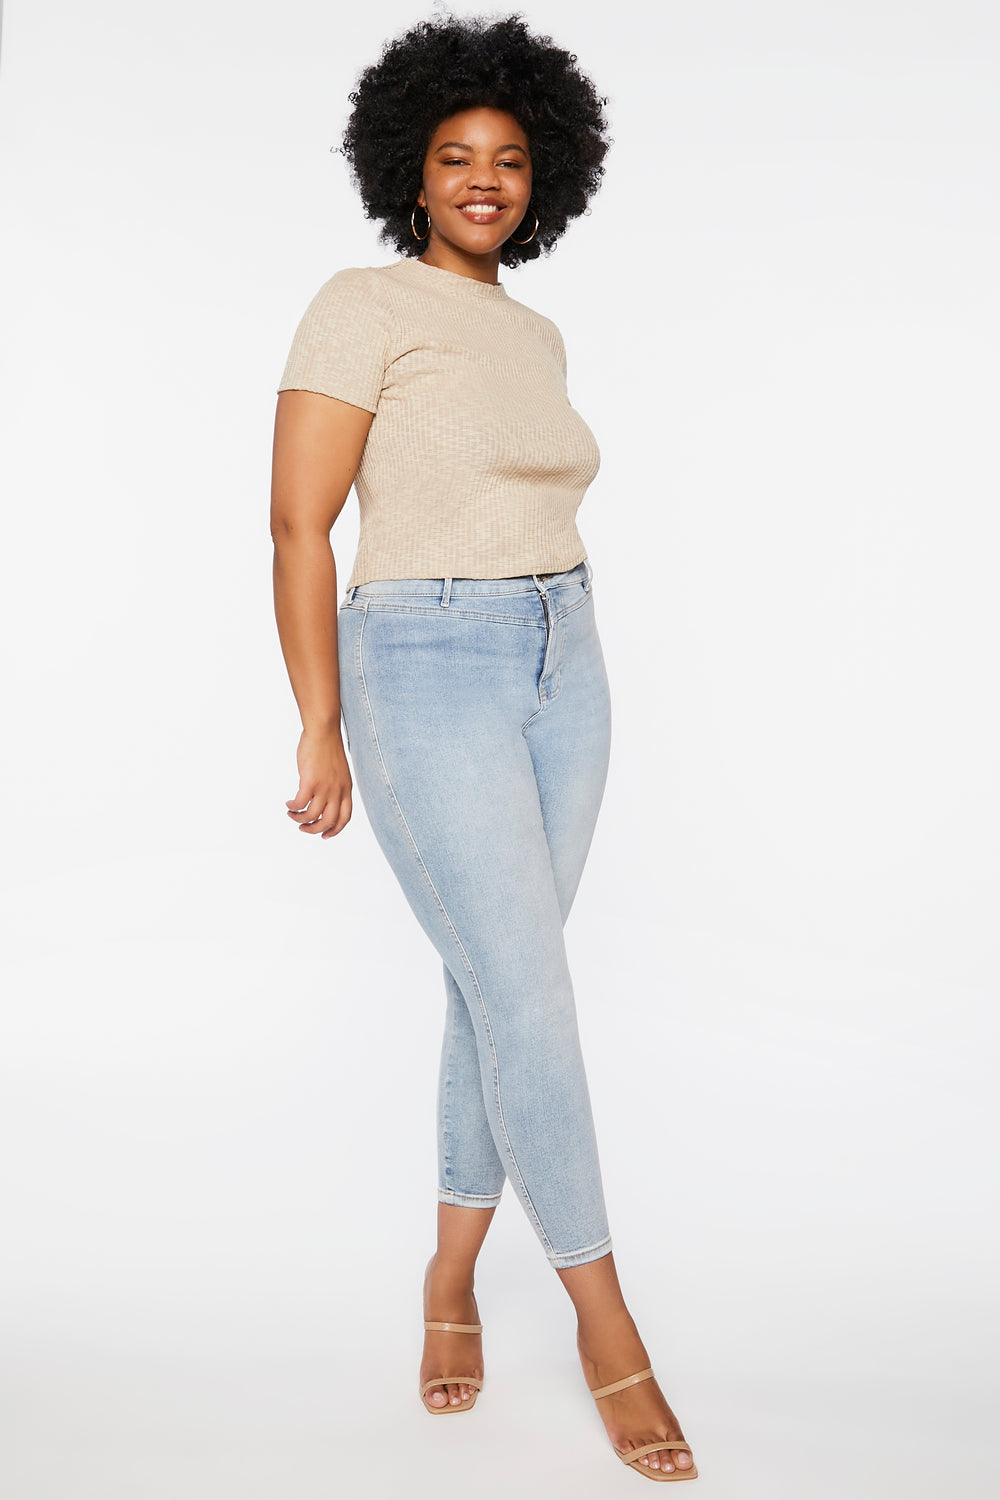 Plus Size High-Neck Tee Taupe